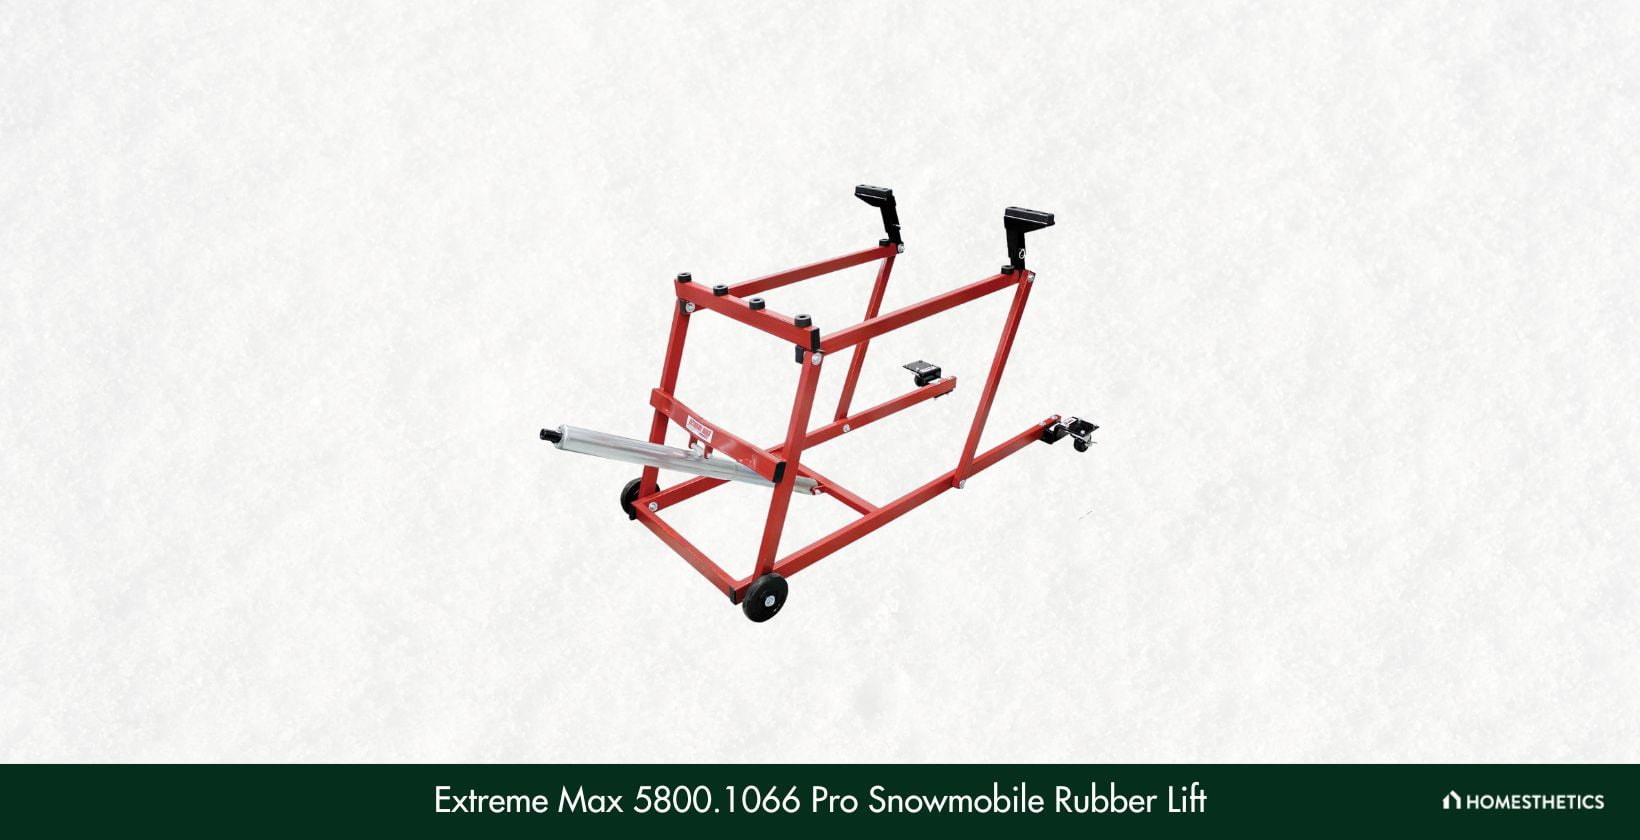 Extreme Max 5800.1066 Pro Snowmobile Rubber Lift 1